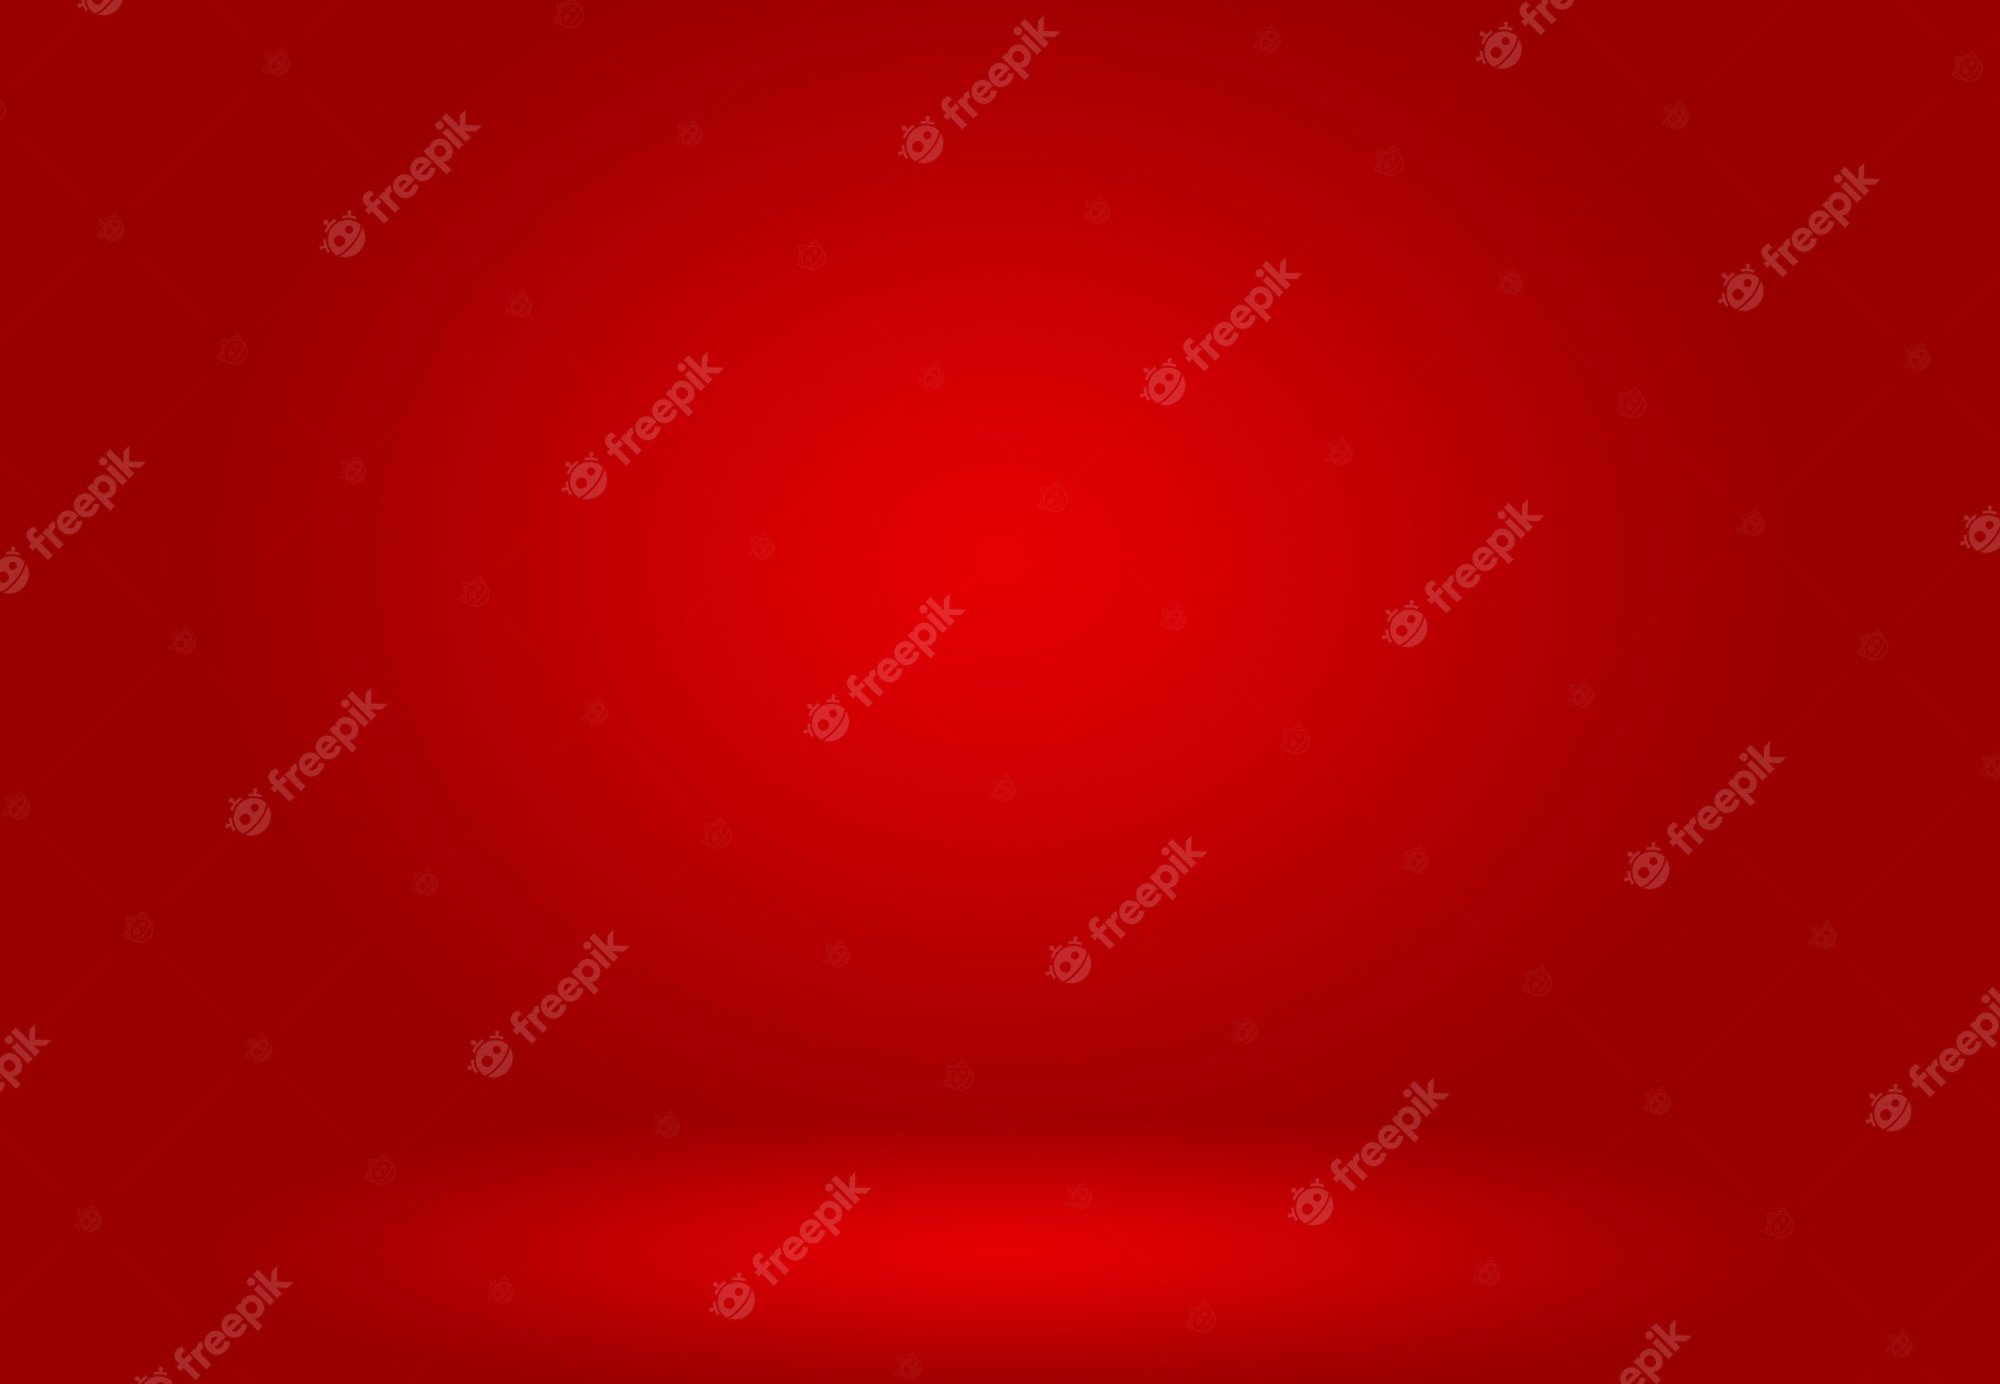 Red gradient abstract background. - Dark red, light red